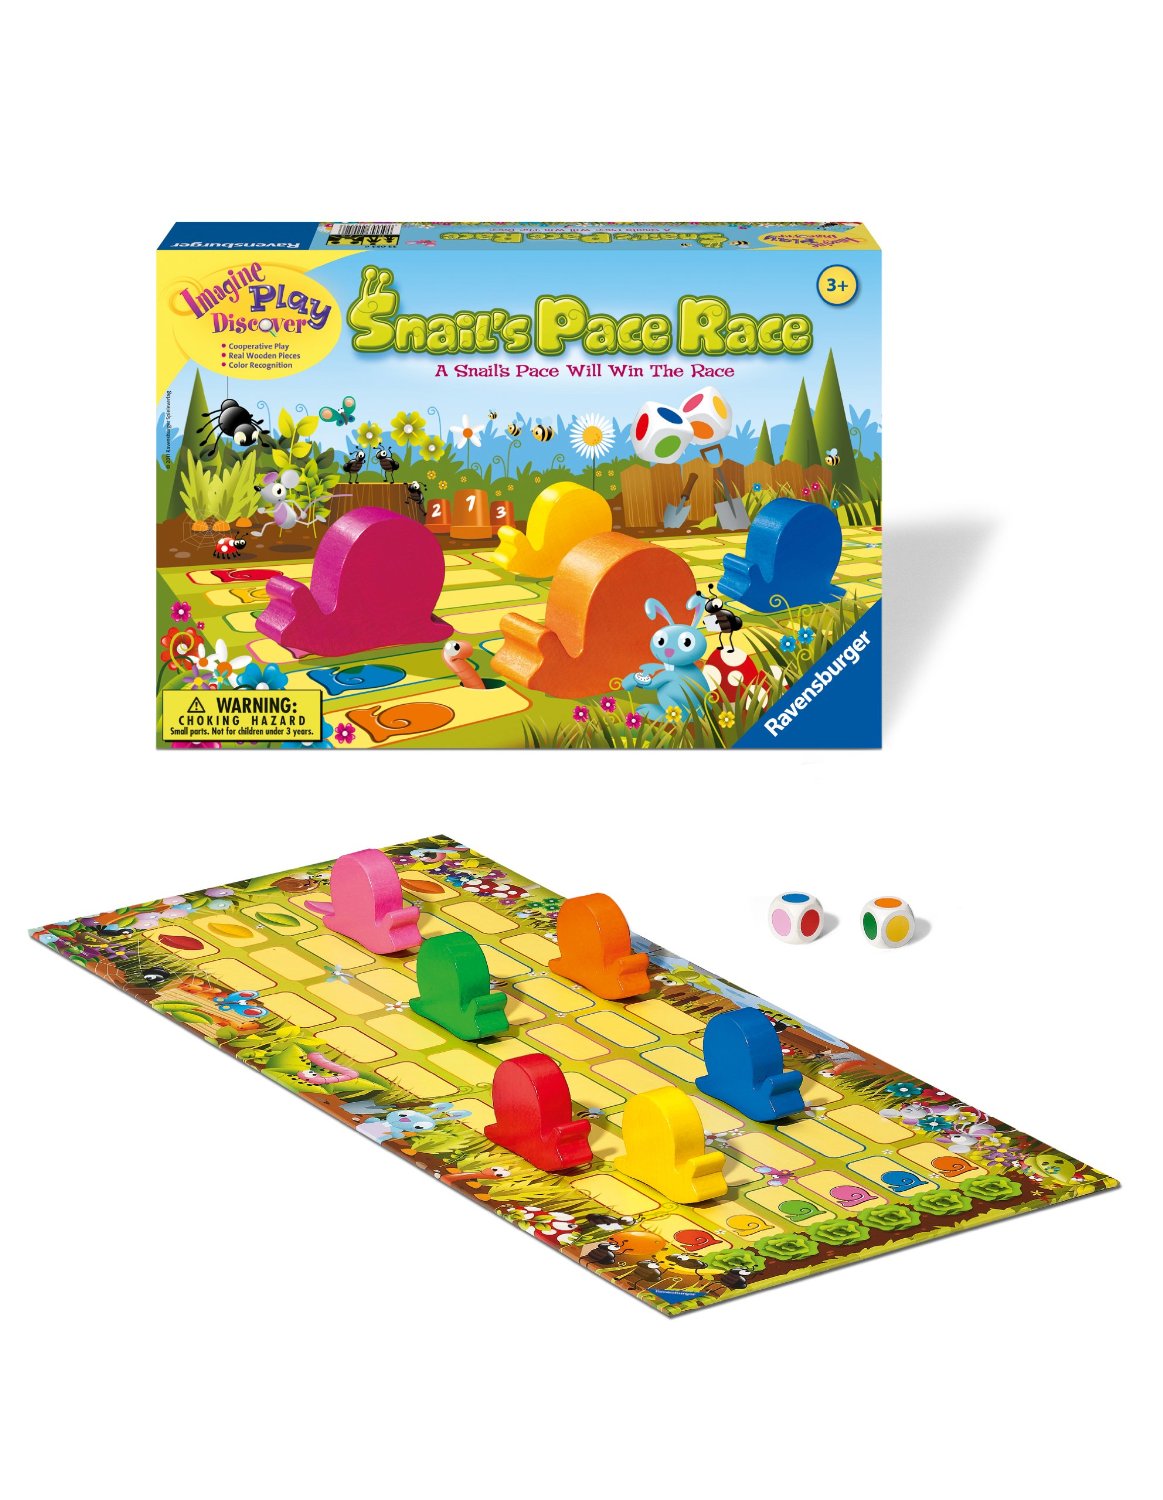 Two First Games by Ravensburger which Teach Colors